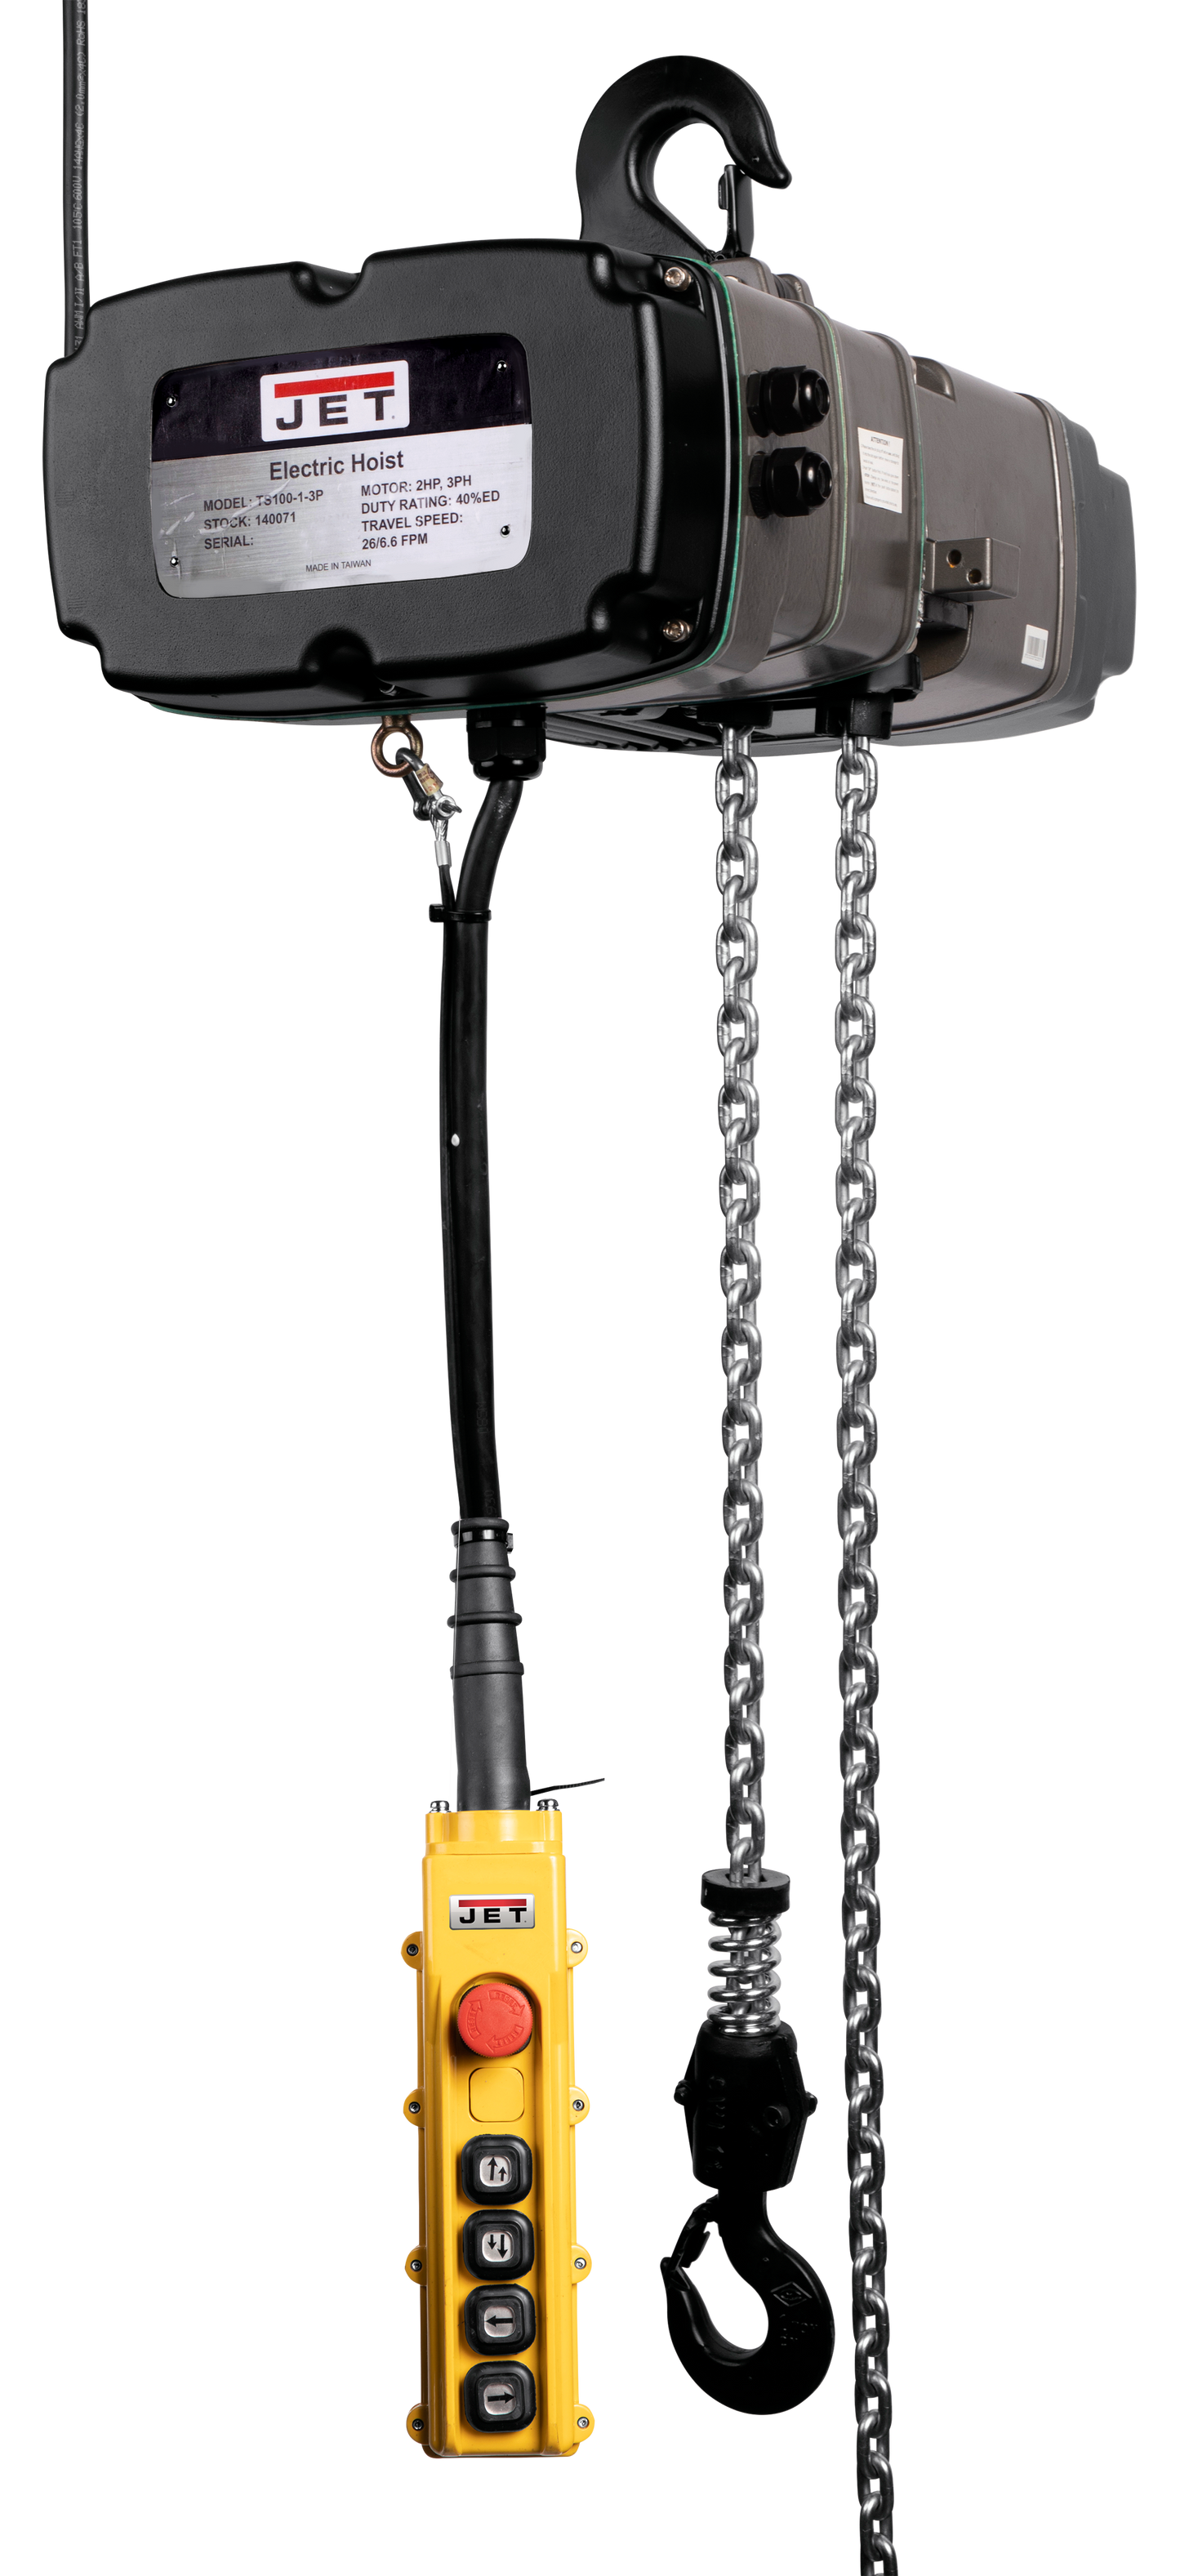 TS500-010 5T Electric Hoist with Trolley & 4 Button Pendant